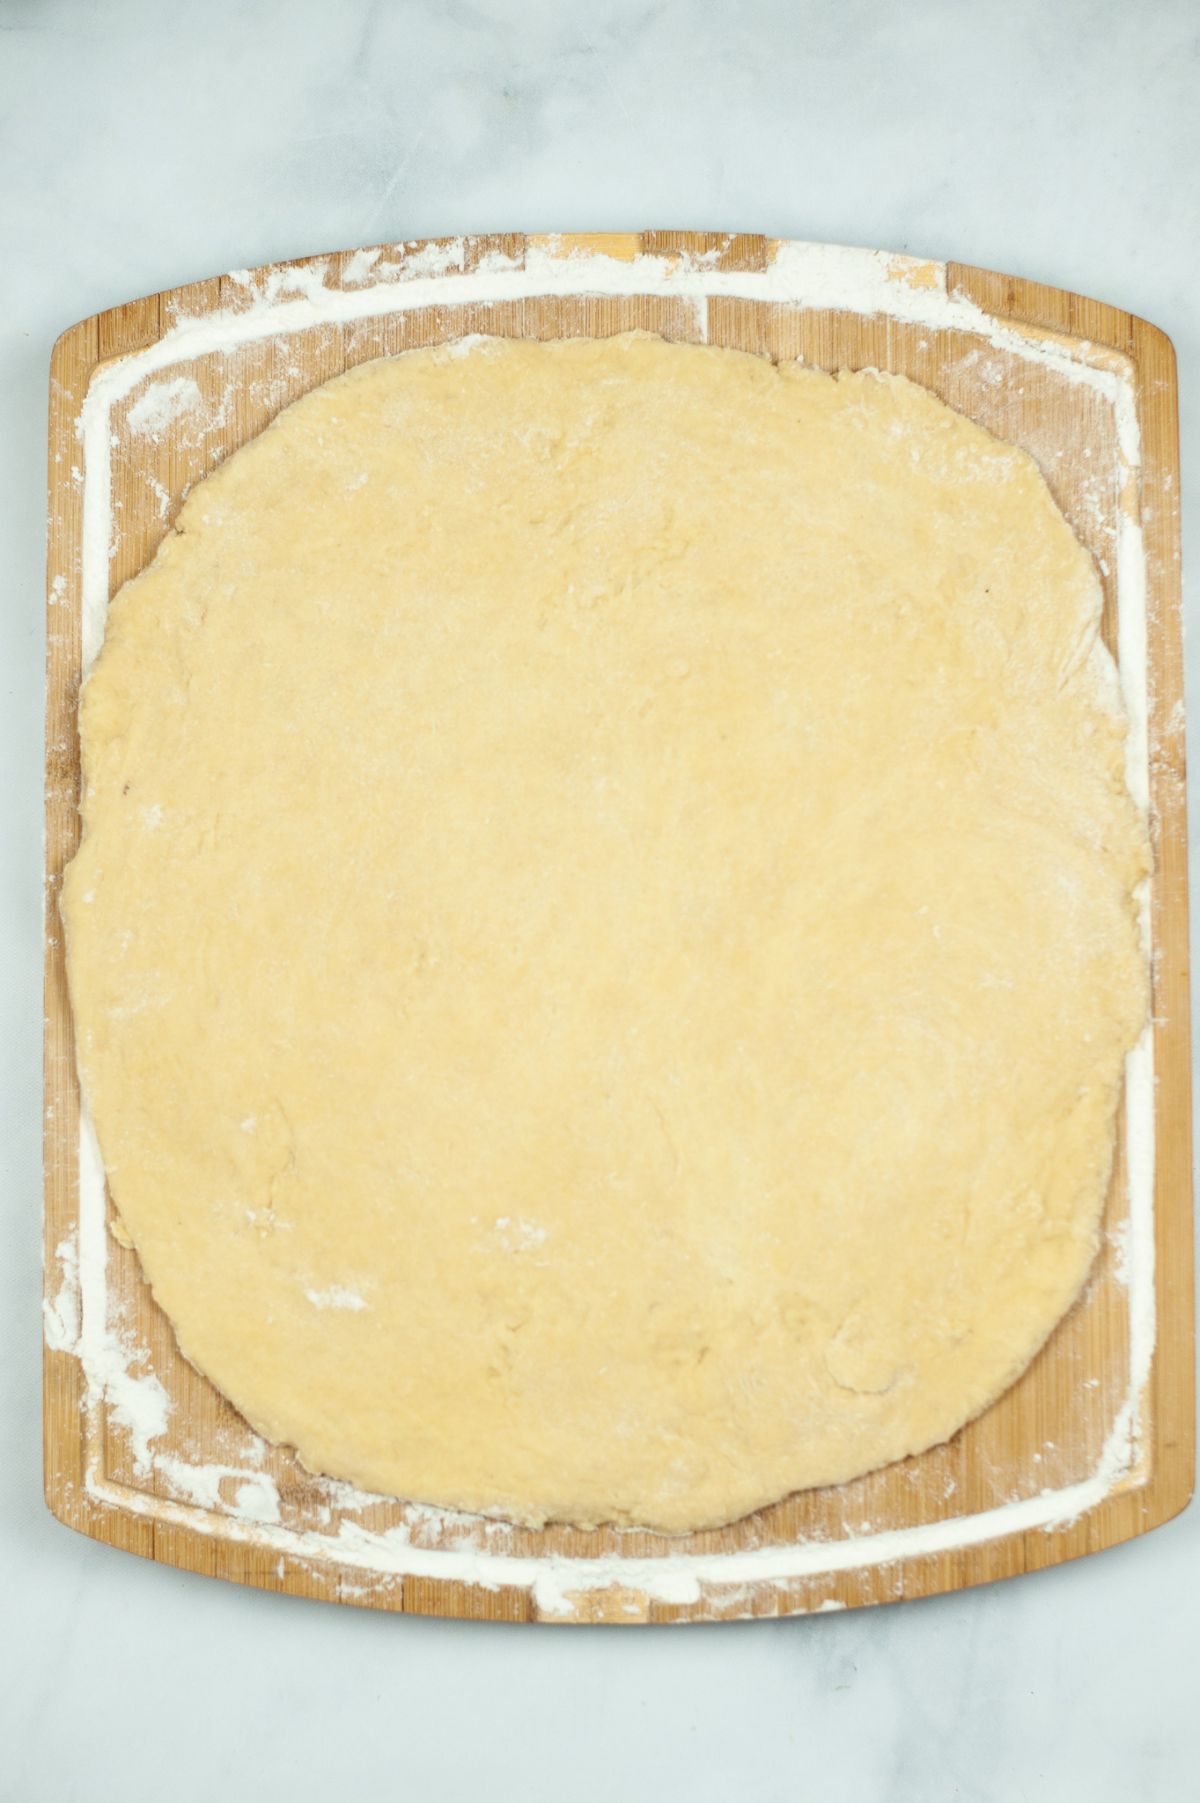 flattened dough on a wooden board dusted with flour